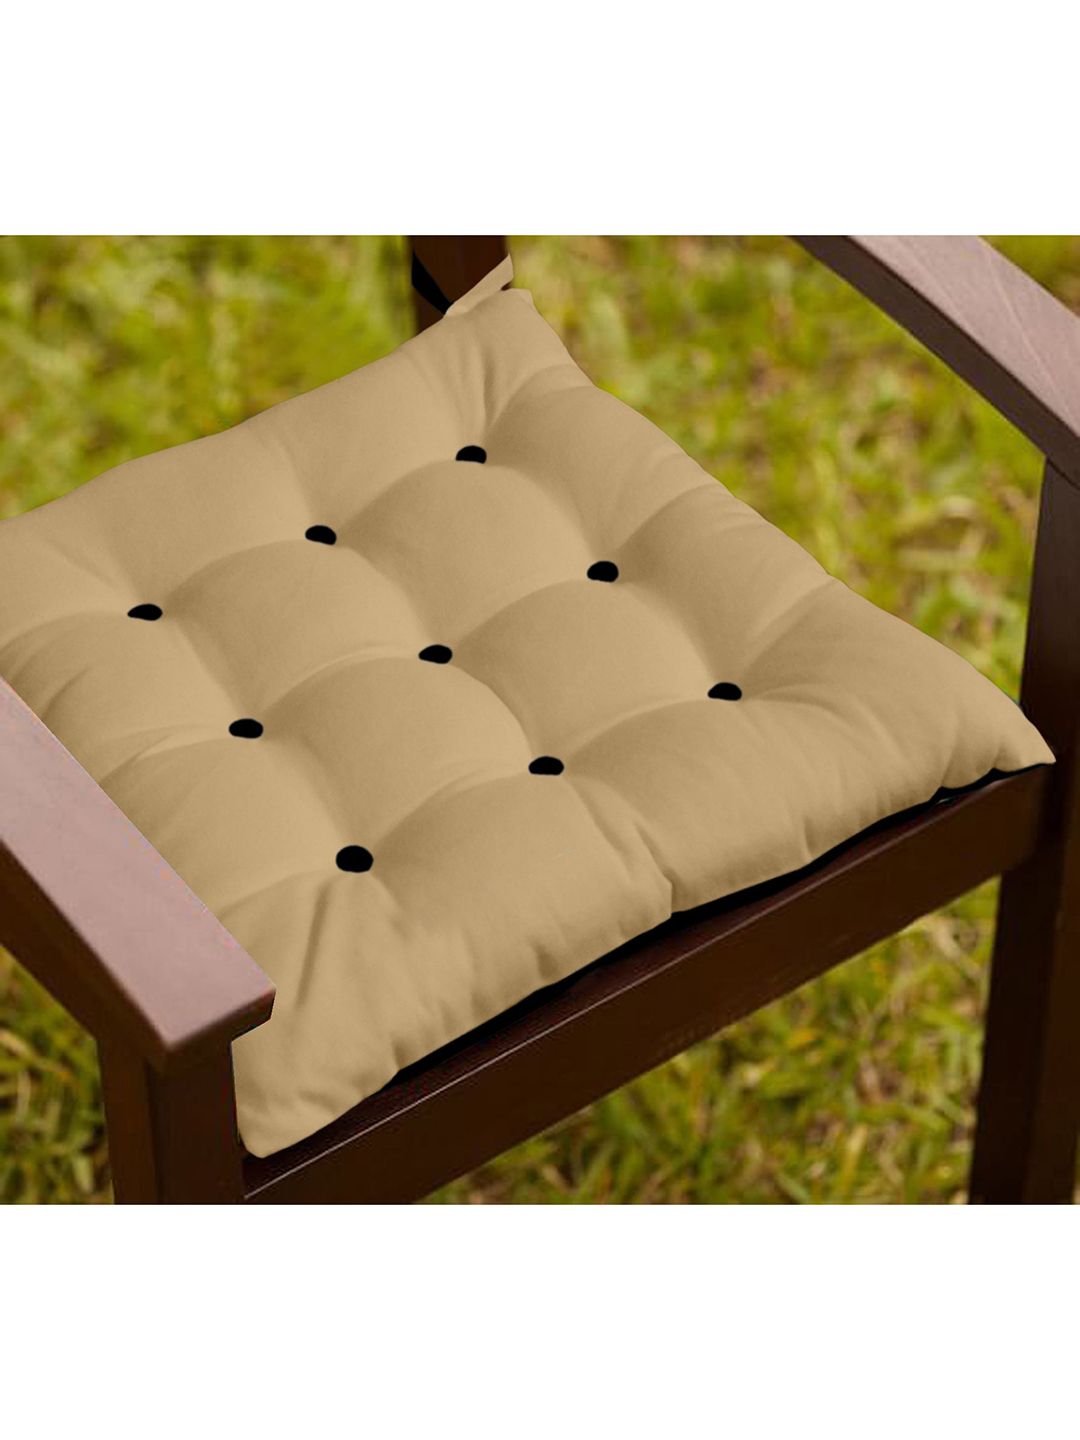 Lushomes Beige & Black Cotton Chair Cushion Price in India